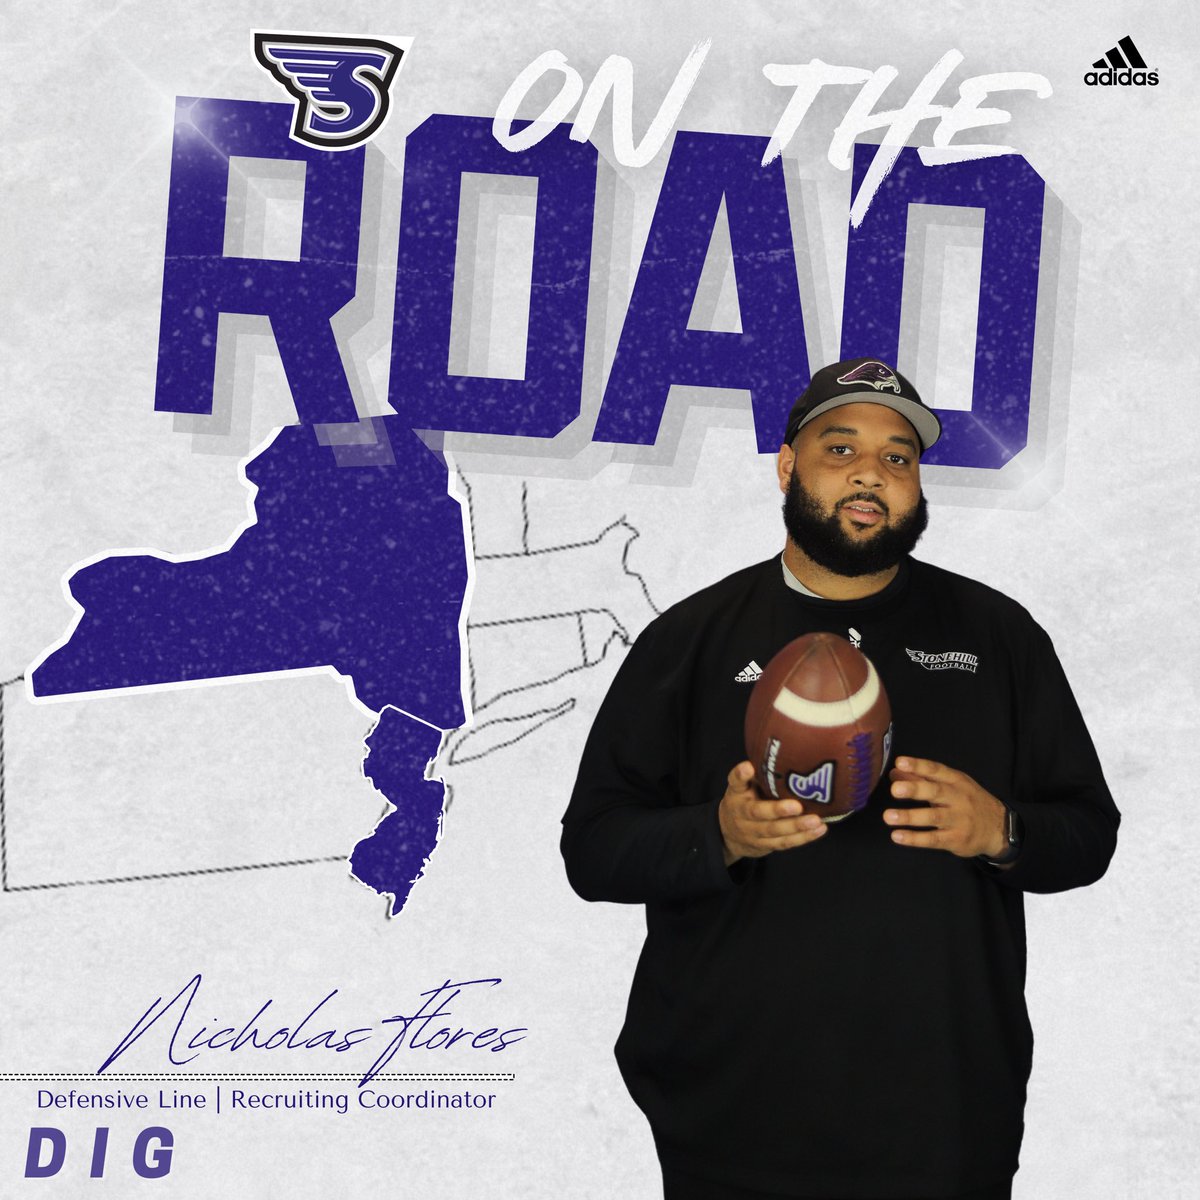 FEELS GOOD TO BE BACK ON THE ROAD IN NORTH JERSEY & NYC !! LETS WORK 🥶 #DIG